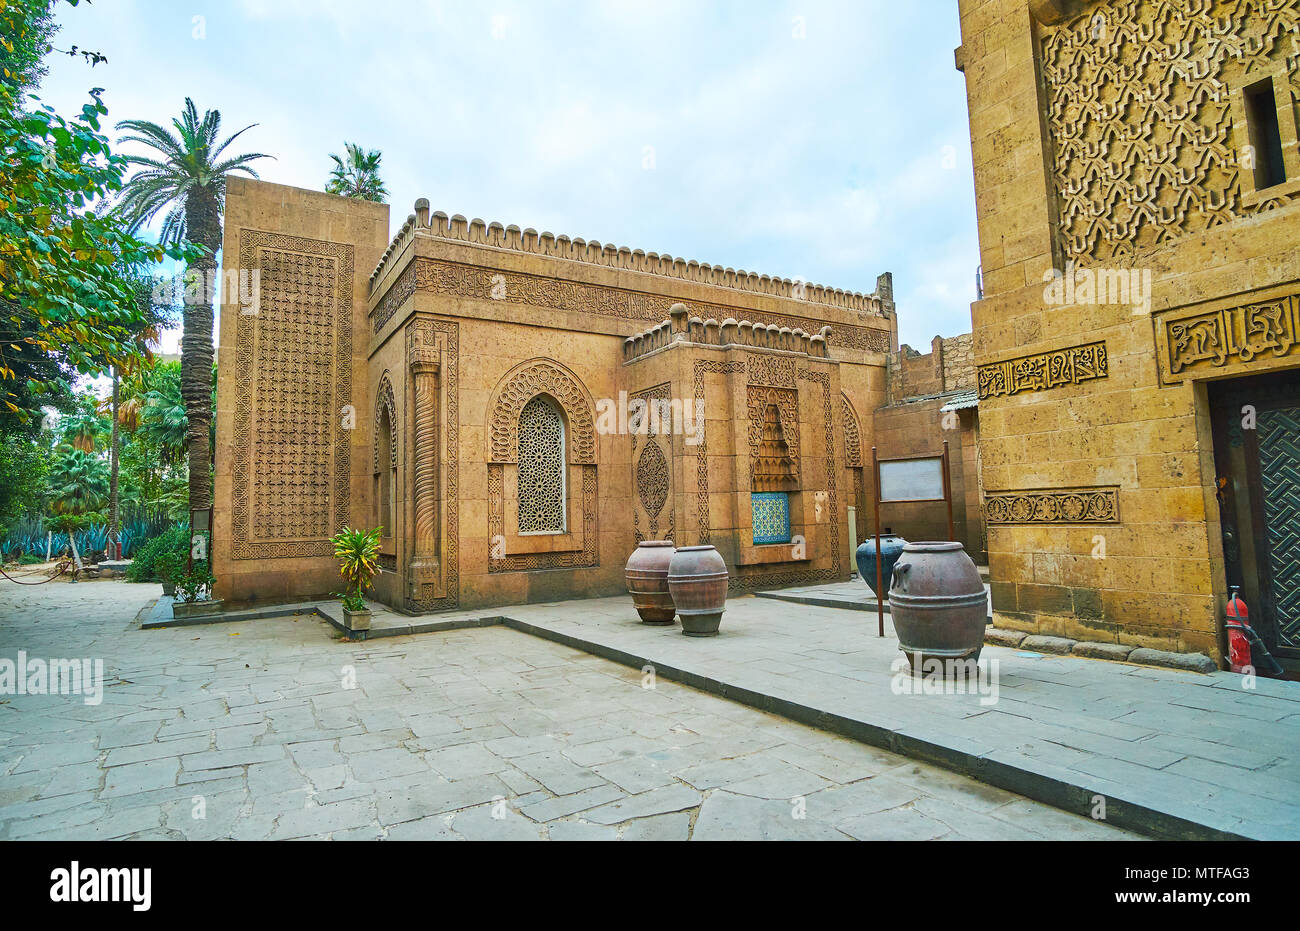 The old mosque of Manial Palace boasts outstanding architecture, intricate carved patterns on its stone walls, Cairo, Egypt. Stock Photo